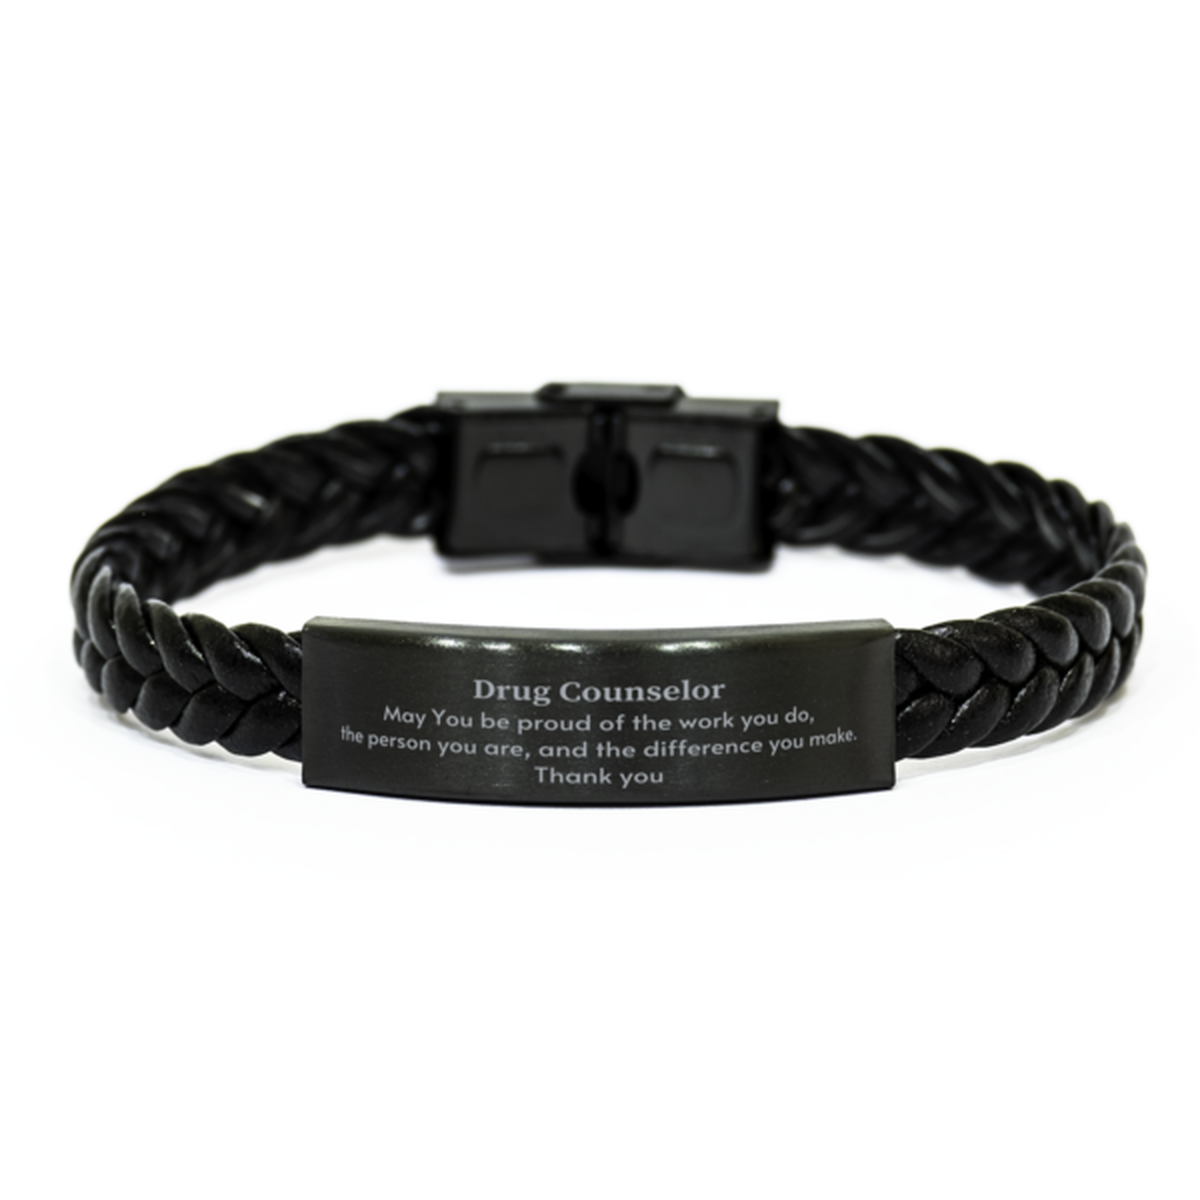 Heartwarming Braided Leather Bracelet Retirement Coworkers Gifts for Drug Counselor, Drug Counselor May You be proud of the work you do, the person you are Gifts for Boss Men Women Friends